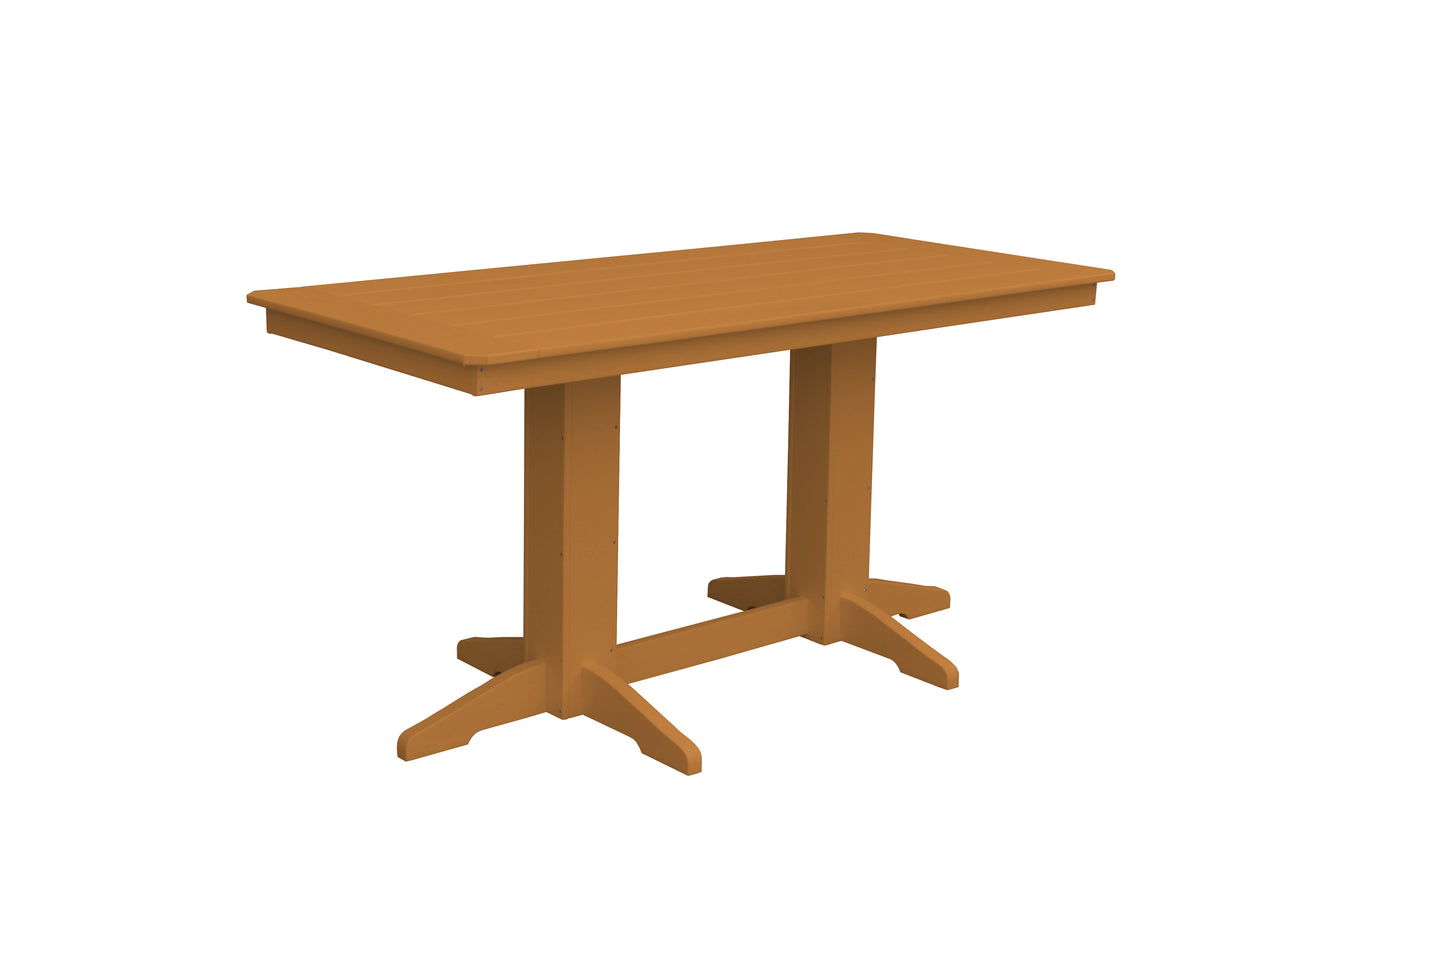 A&L Furniture Co. Recycled Plastic 6' Rectangular Table (Counter Height) - LEAD TIME TO SHIP 10 BUSINESS DAYS